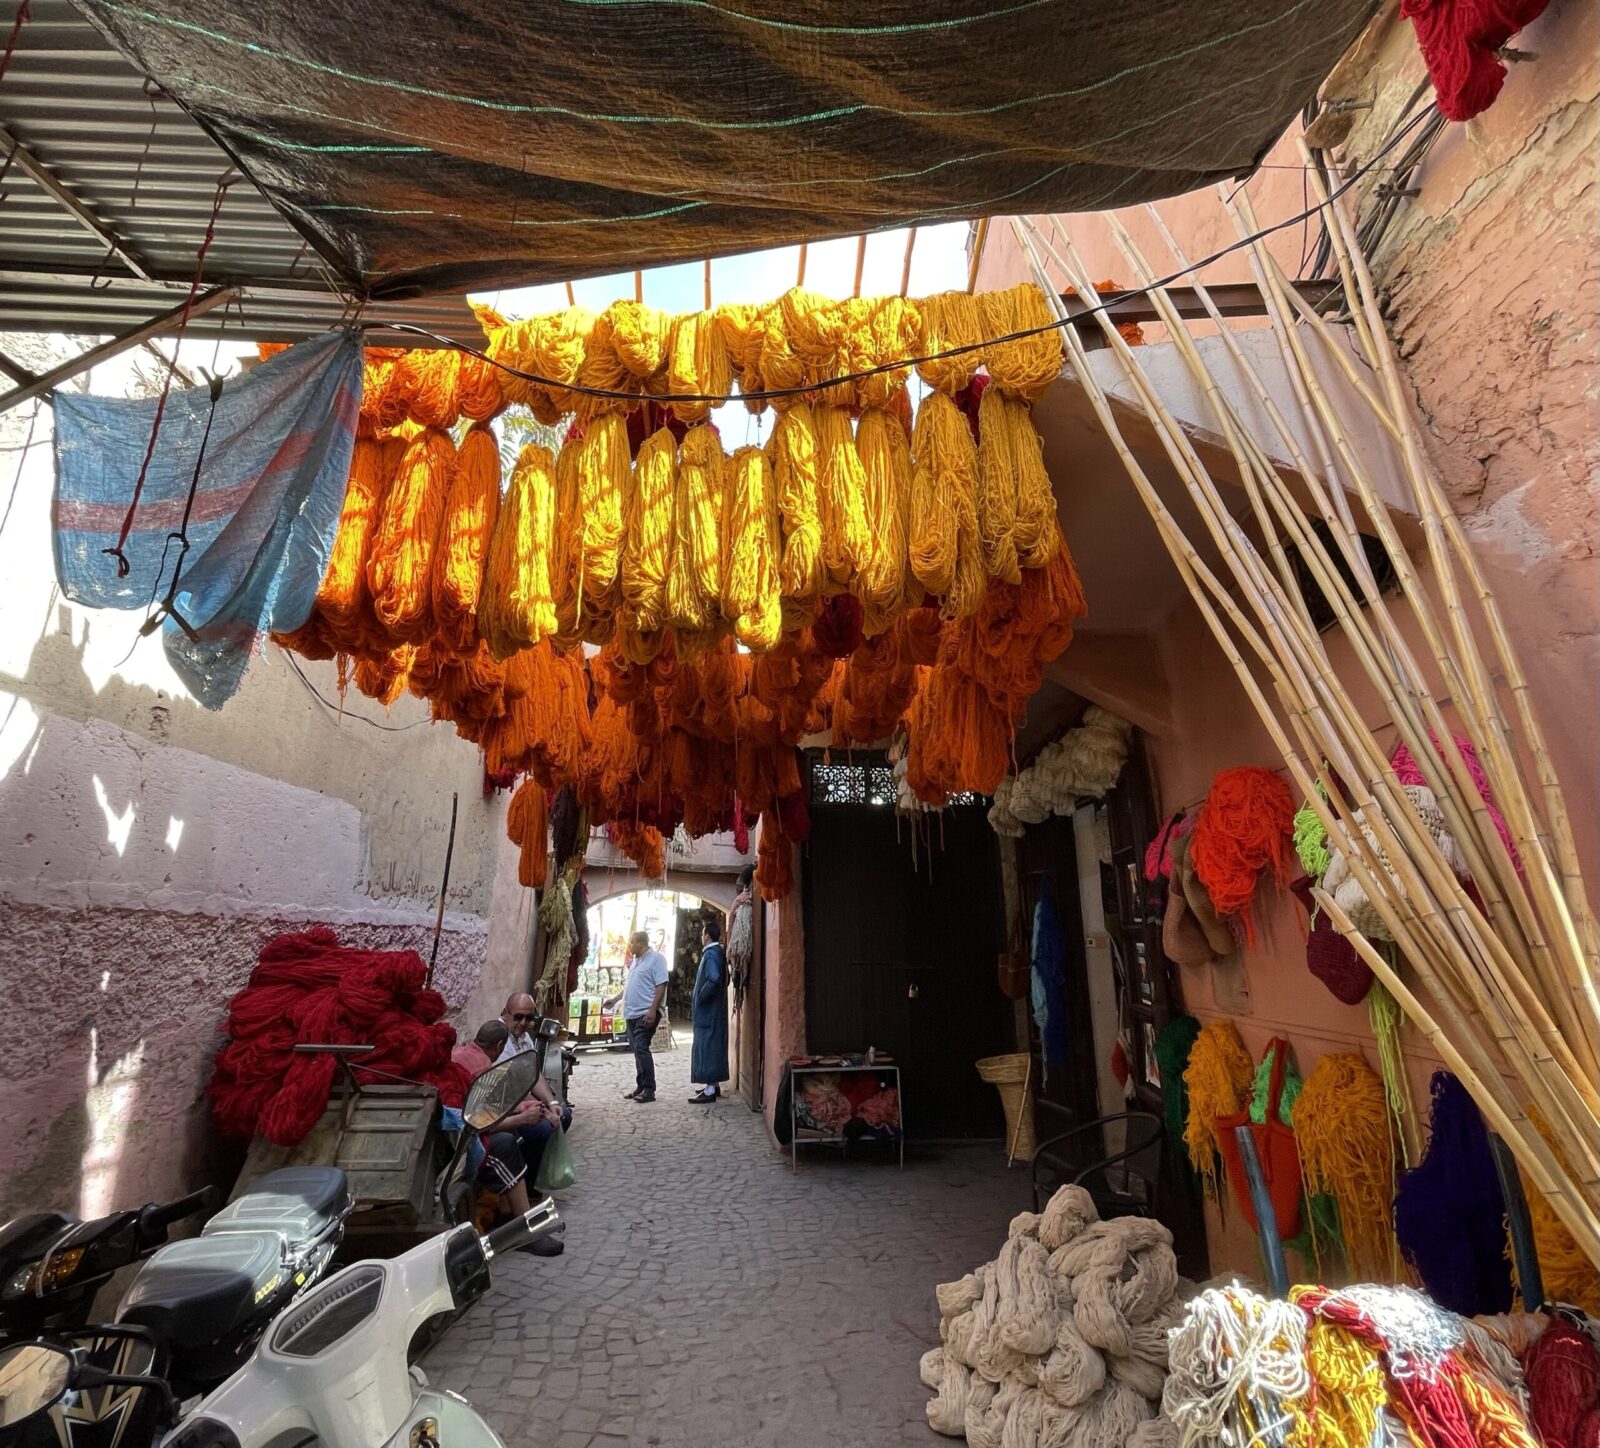 Yellow and red yarns drying in the sun in Marrakech